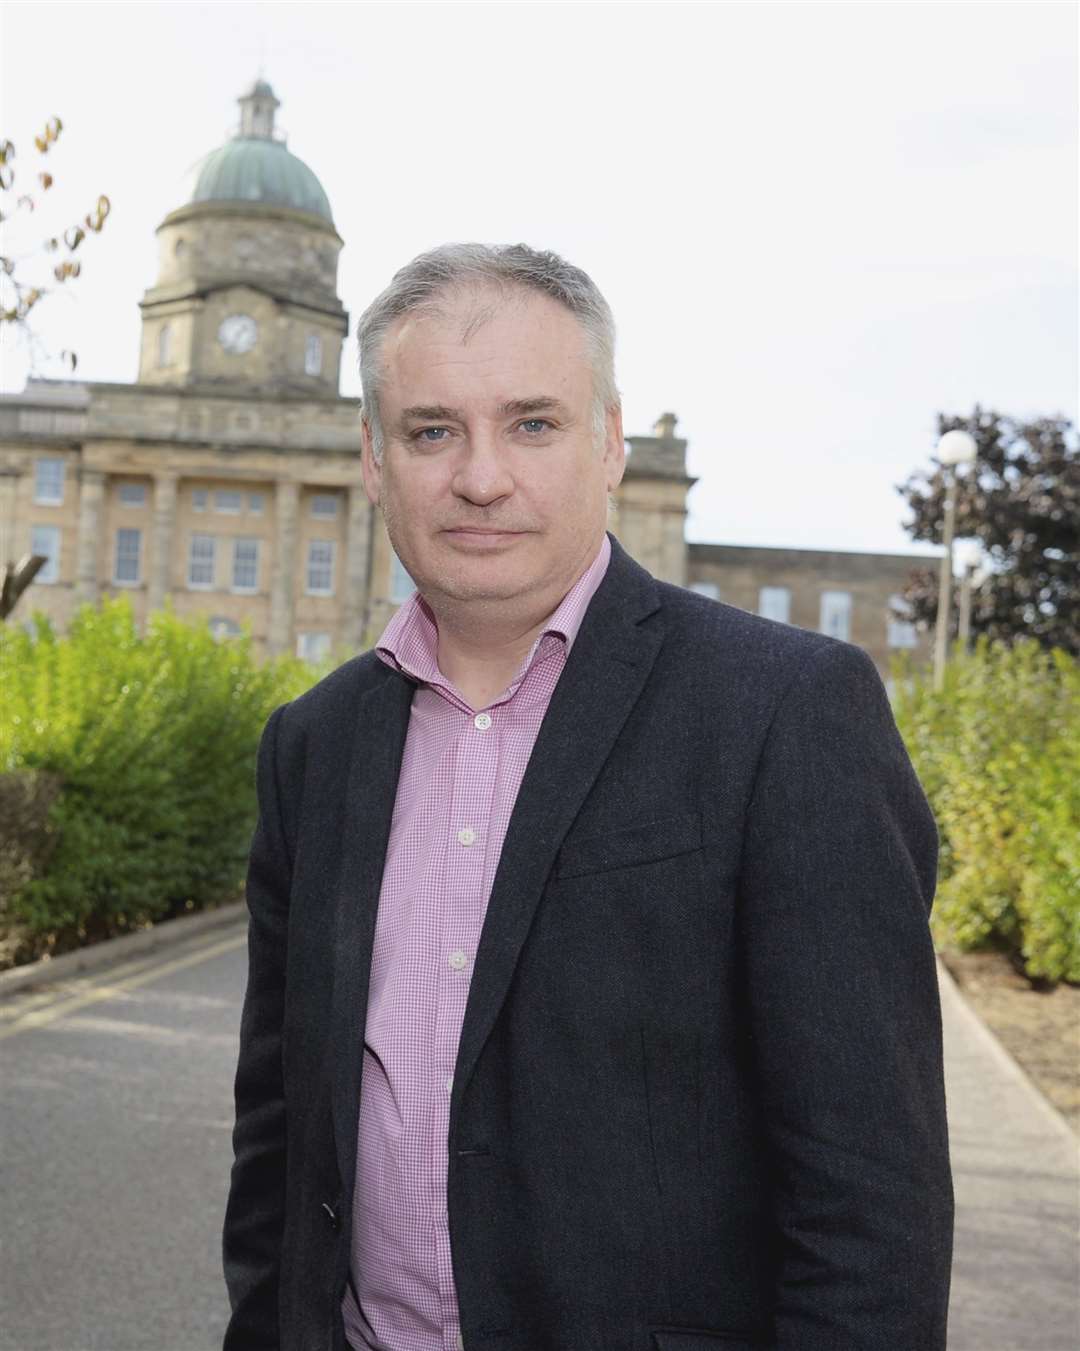 Higher Education minister Richard Lochhead